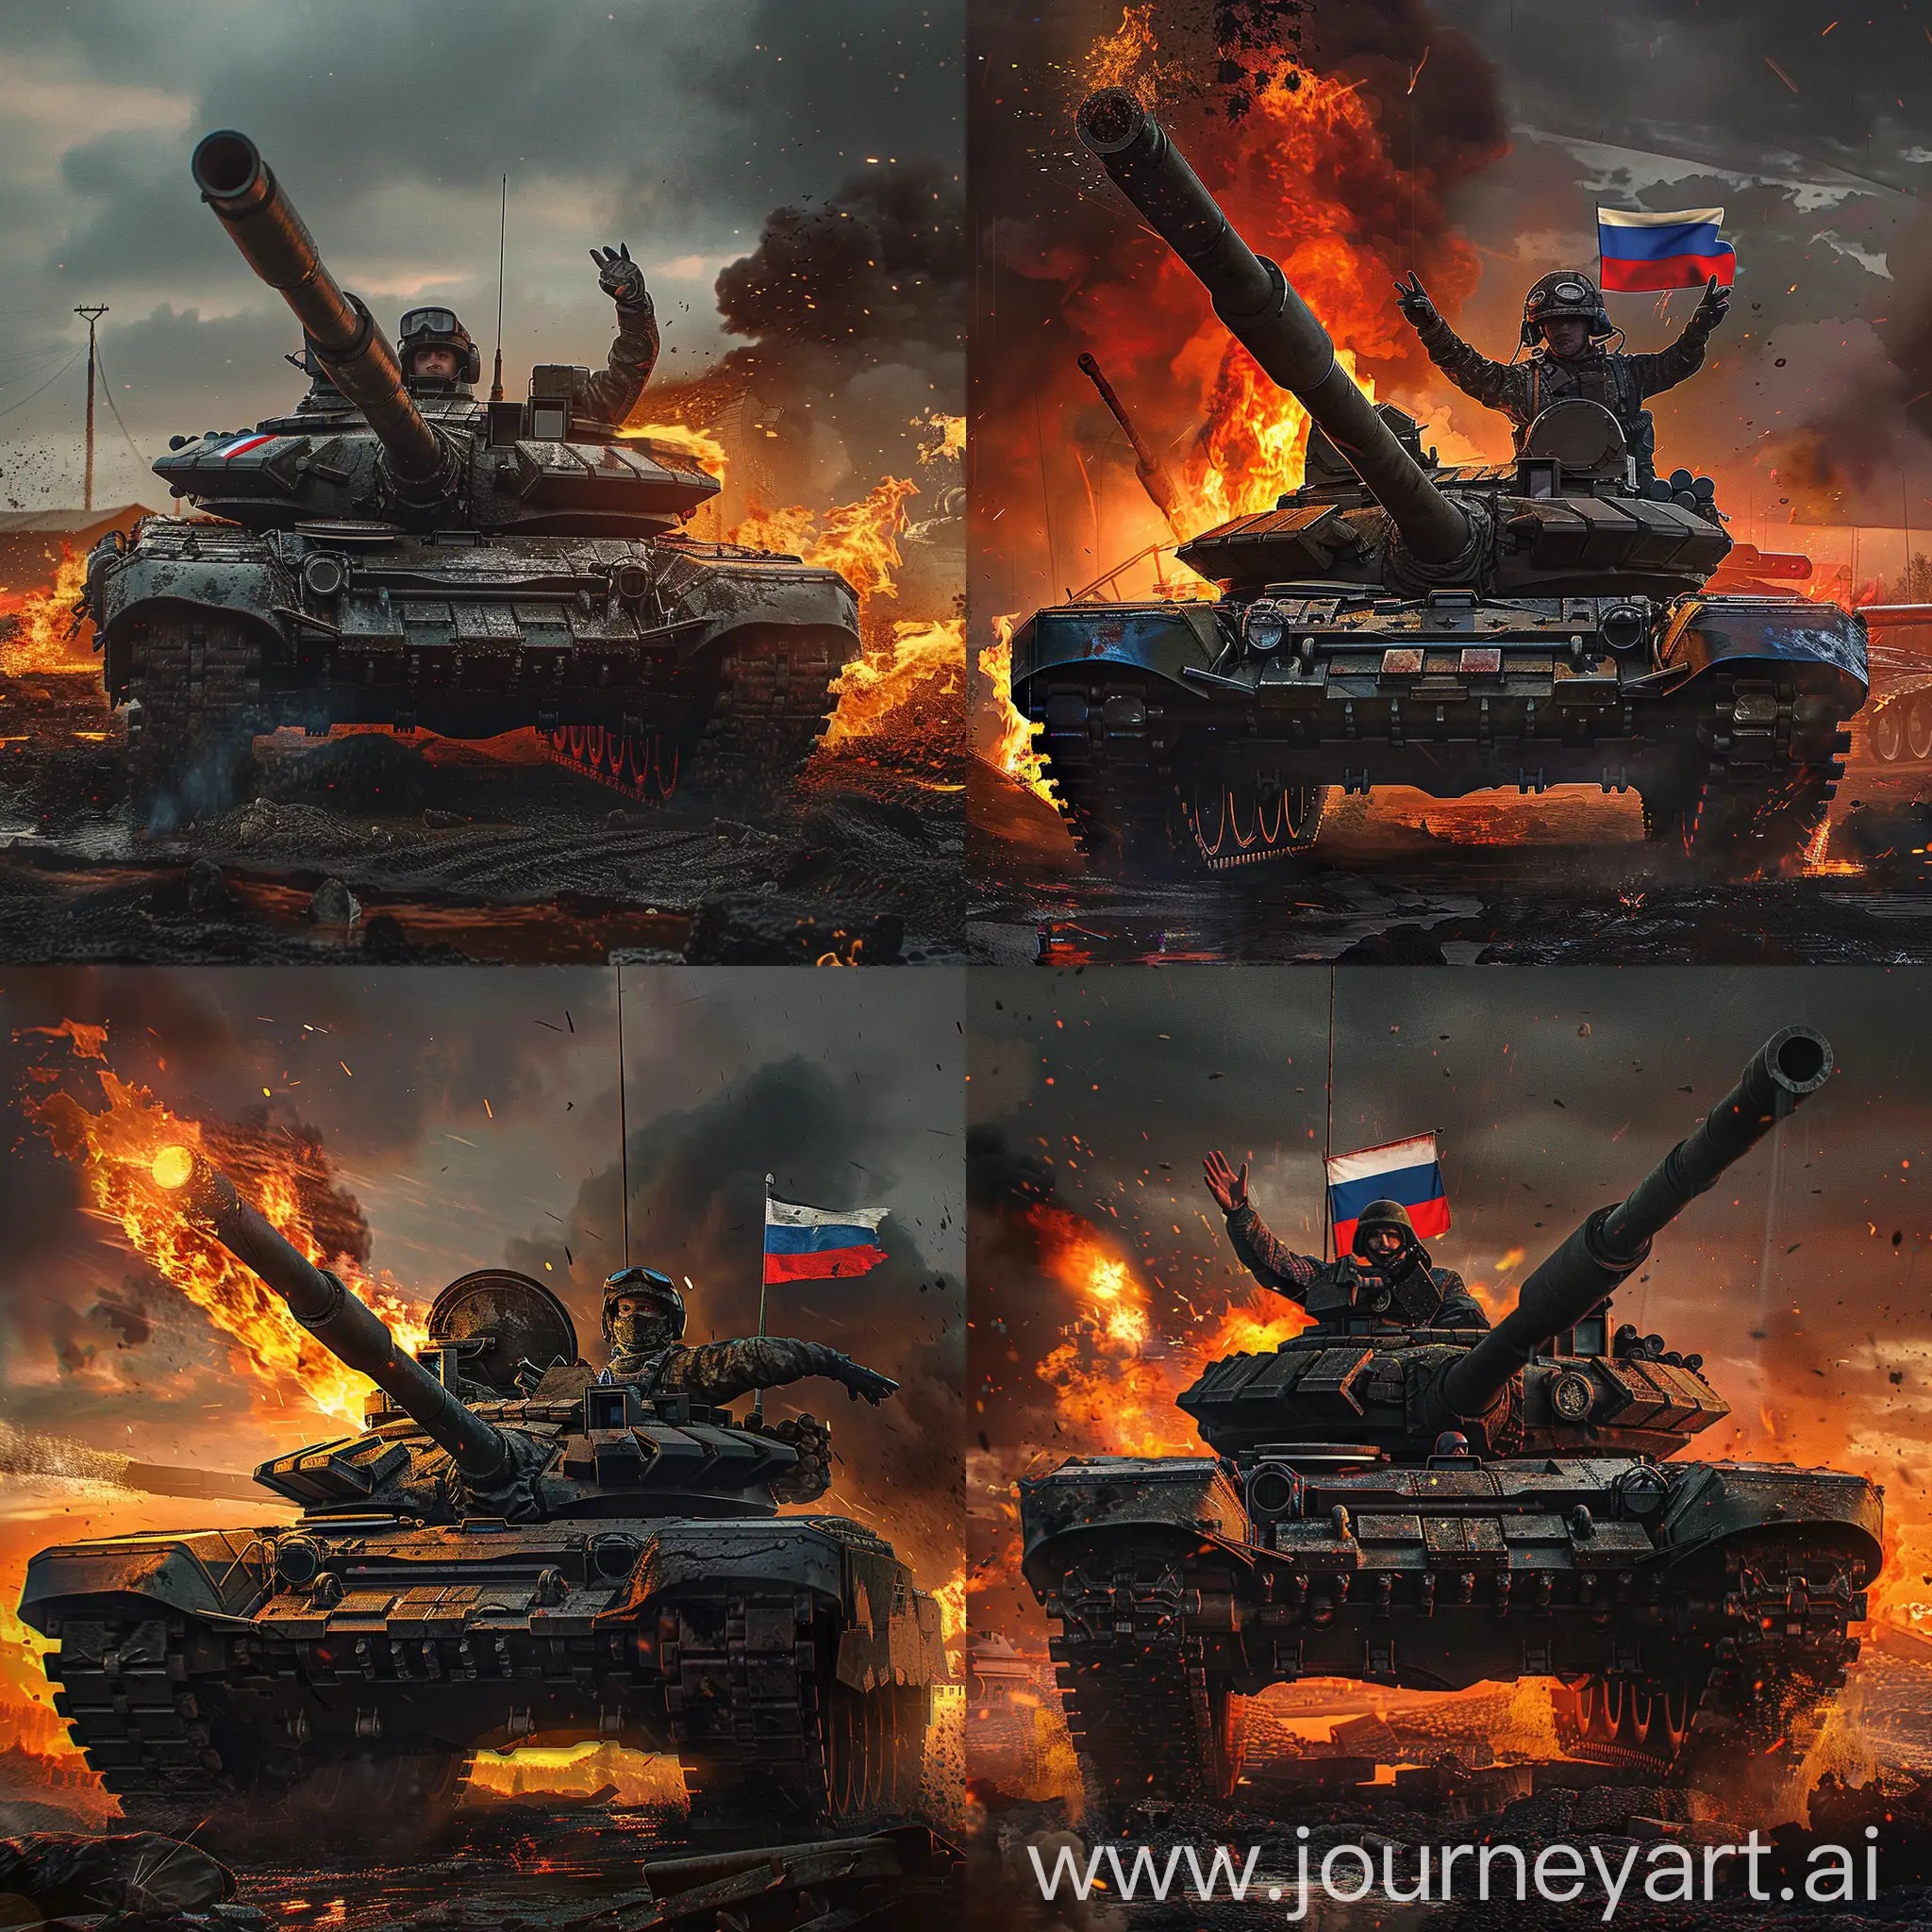 Burning-American-Abrams-Tank-with-Russian-Tricolor-Patch-and-Z